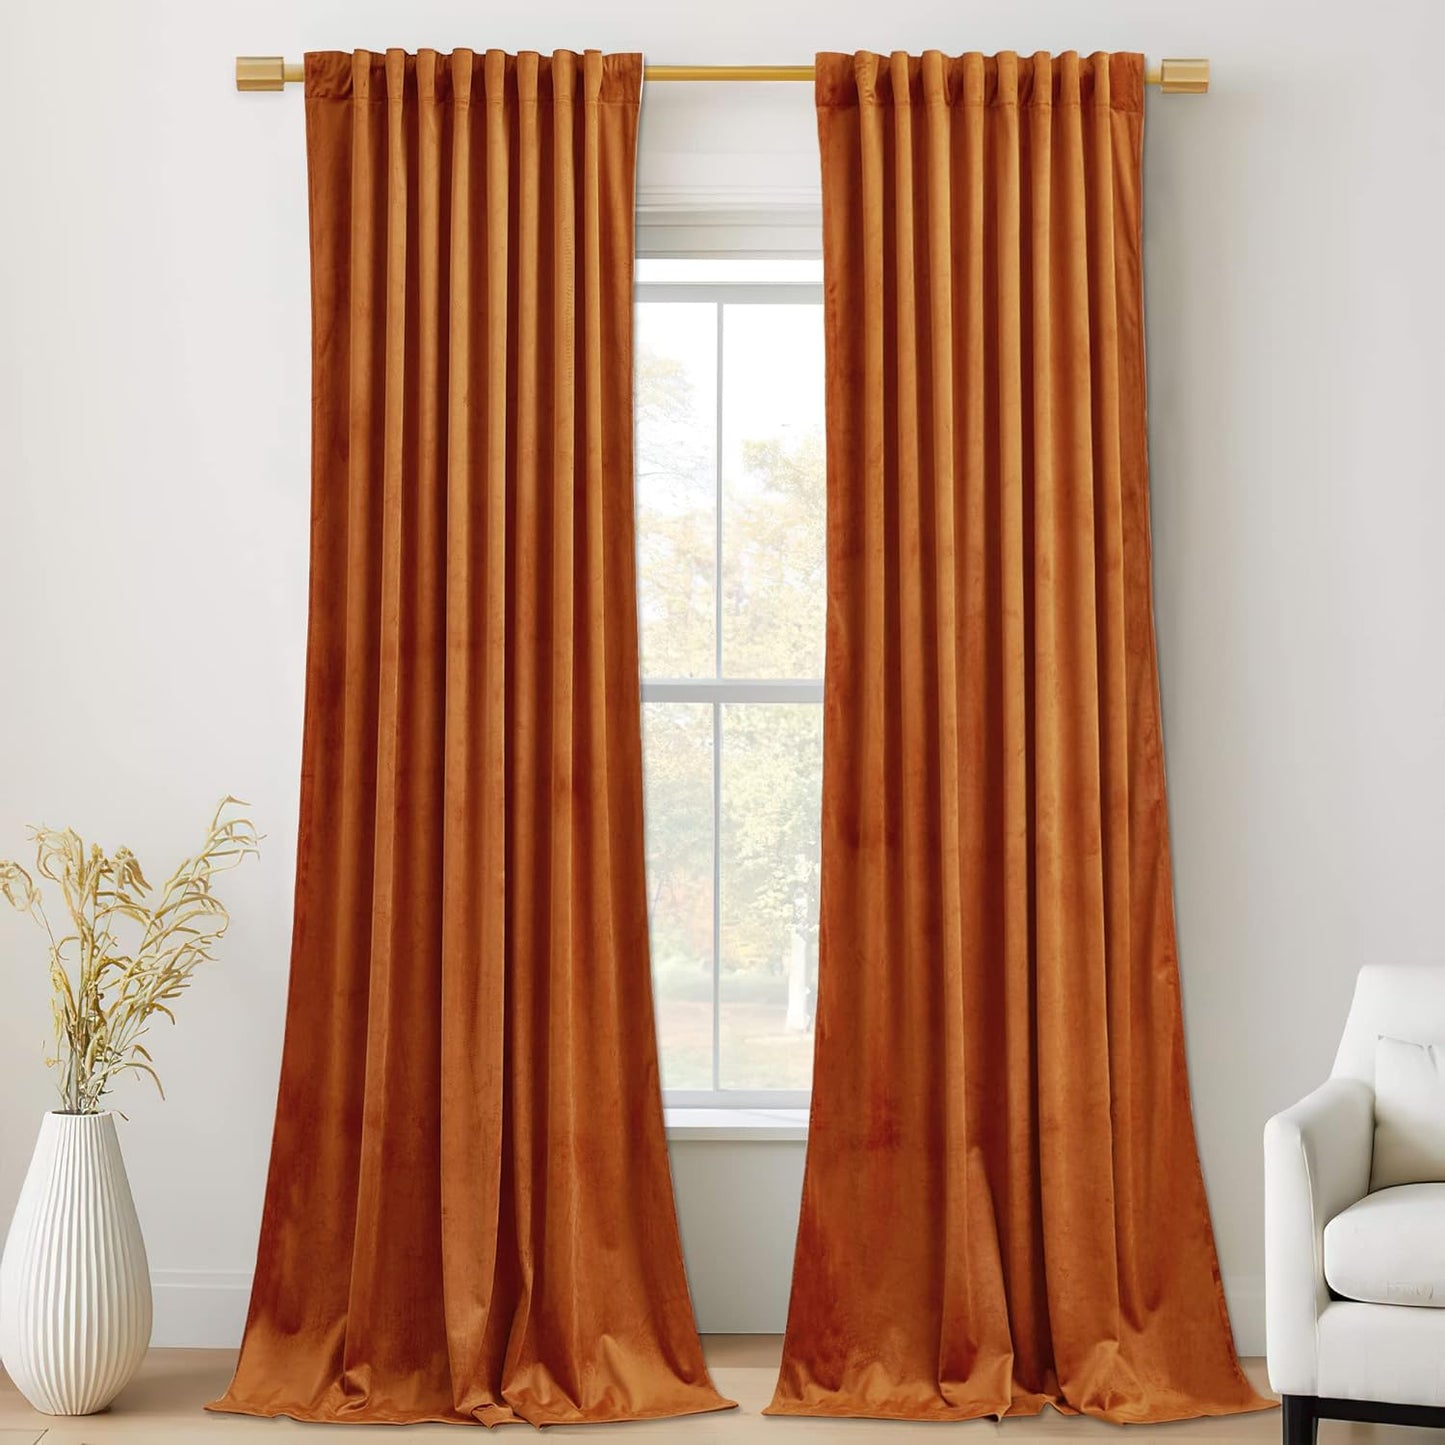 Stangh Velvet Curtains 84 Inches - Gold Brown Blackout Thermal Insulated Window Drapes for Living Room, Back Tab Luxury Home Decor Curtains for Bedroom Sliding Door, W52 X L84, 2 Panels  StangH Orange W52" X L120" 